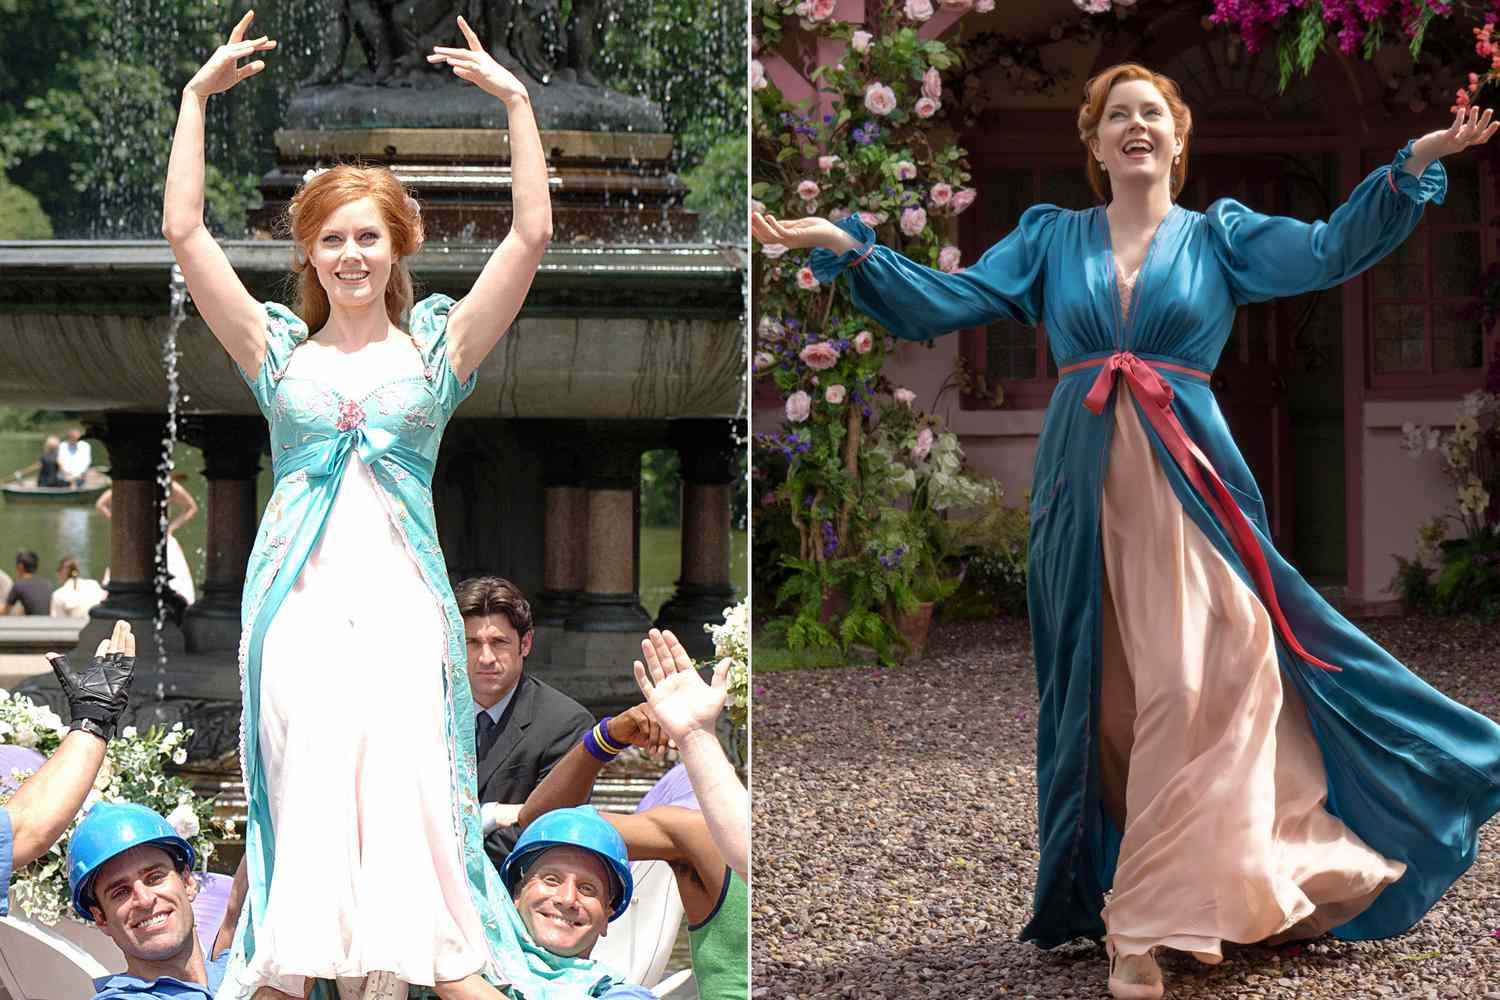 ENCHANTED, Amy Adams (top), 2007. ©Buena Vista Pictures/courtesy Everett Collection; Amy Adams as Giselle in Disney's live action DISENCHANTED, exclusively on Disney+. Photo by Jonathan Hession. 2022 Disney Enterprises, Inc. All Rights Reserved.